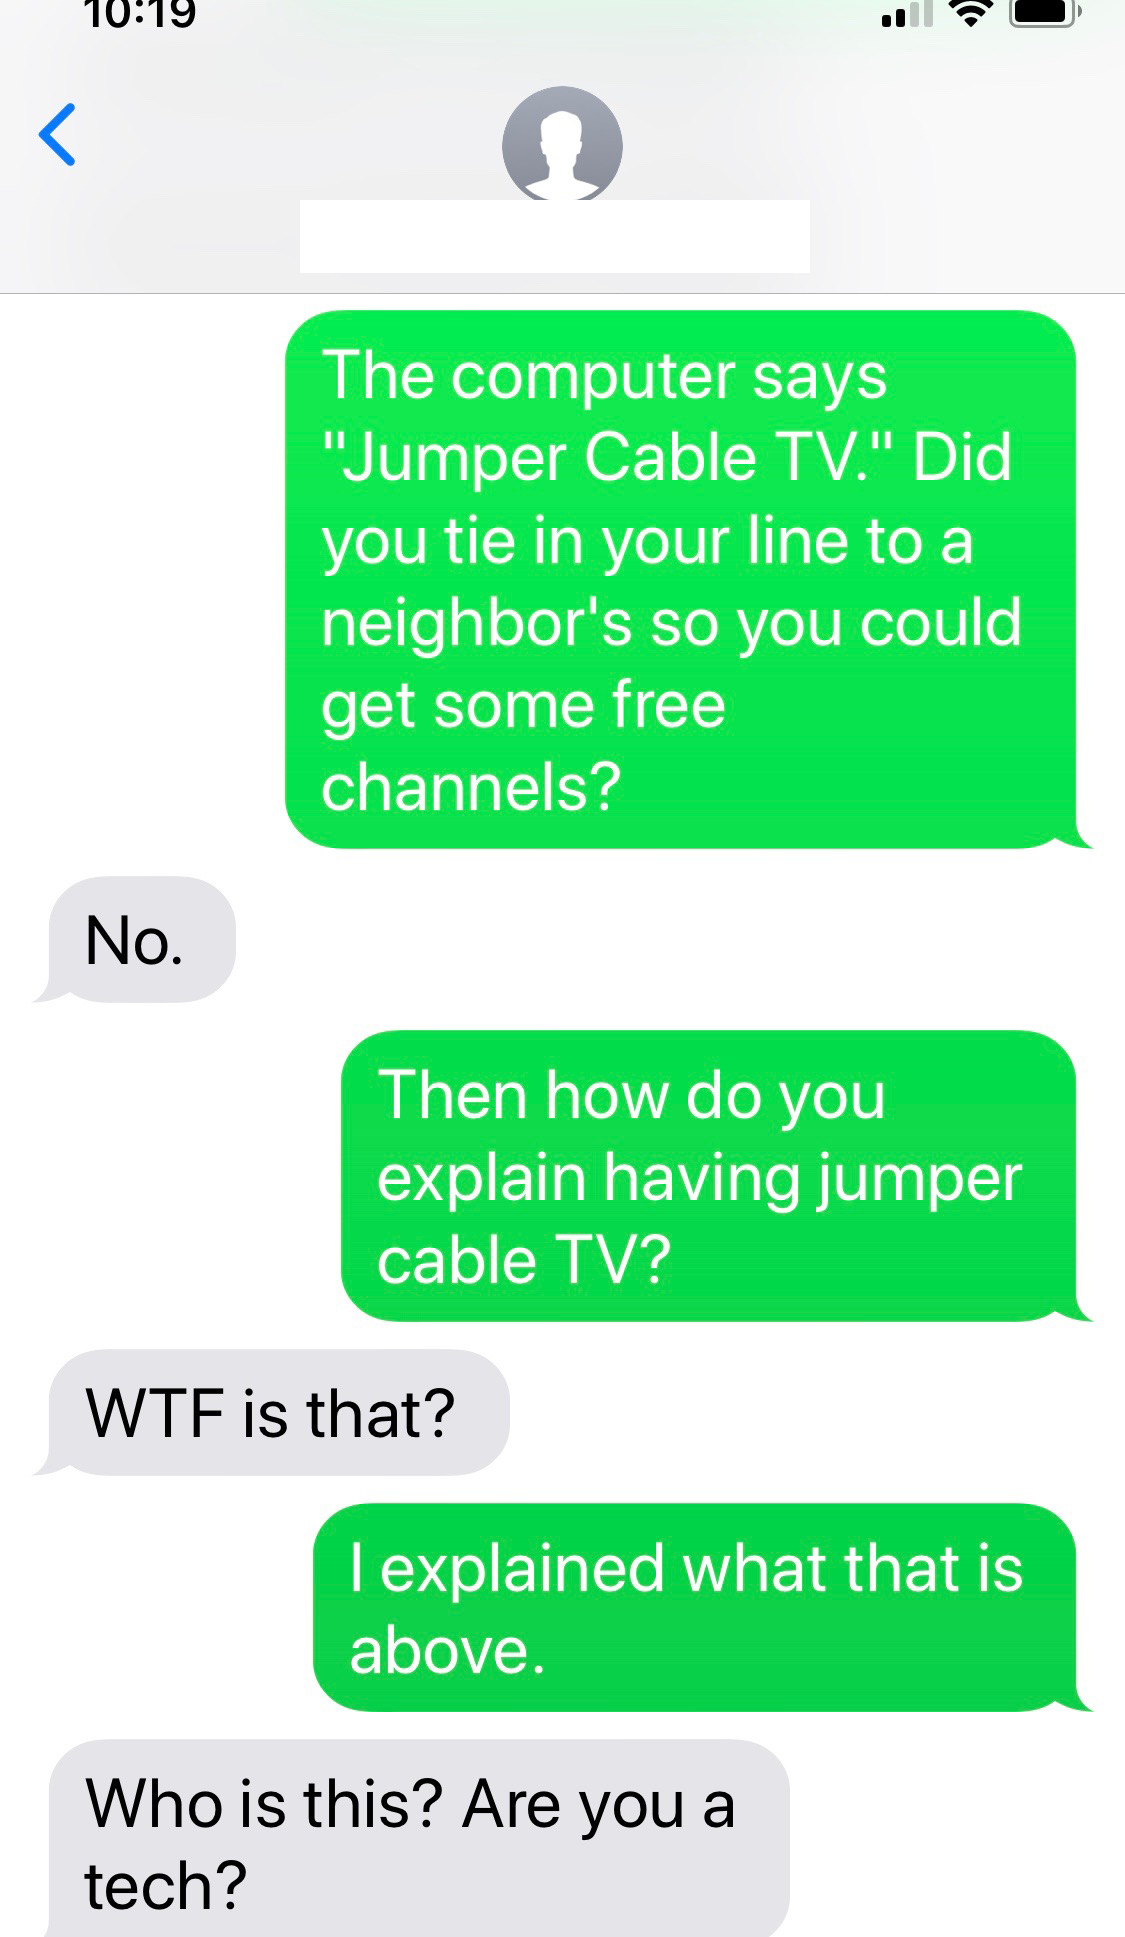 wrong number text - number - 1019 The computer says "Jumper Cable Tv." Did you tie in your line to a neighbor's so you could get some free channels? No. Then how do you explain having jumper cable Tv? Wtf is that? I explained what that is above. Who is th